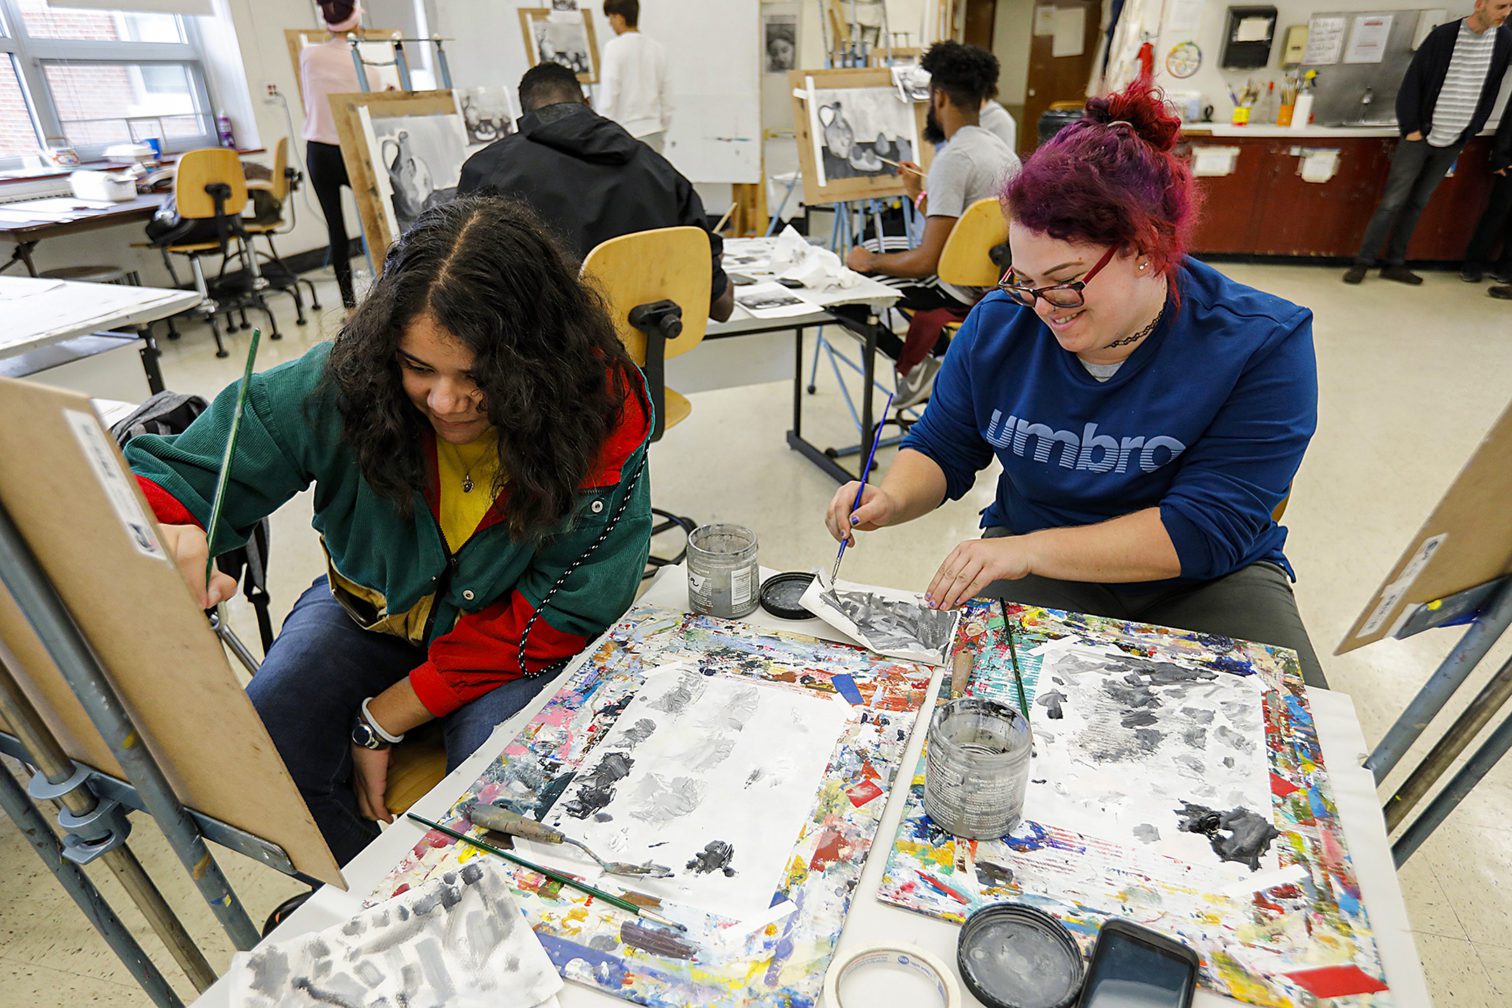 Students in the art studio painting.